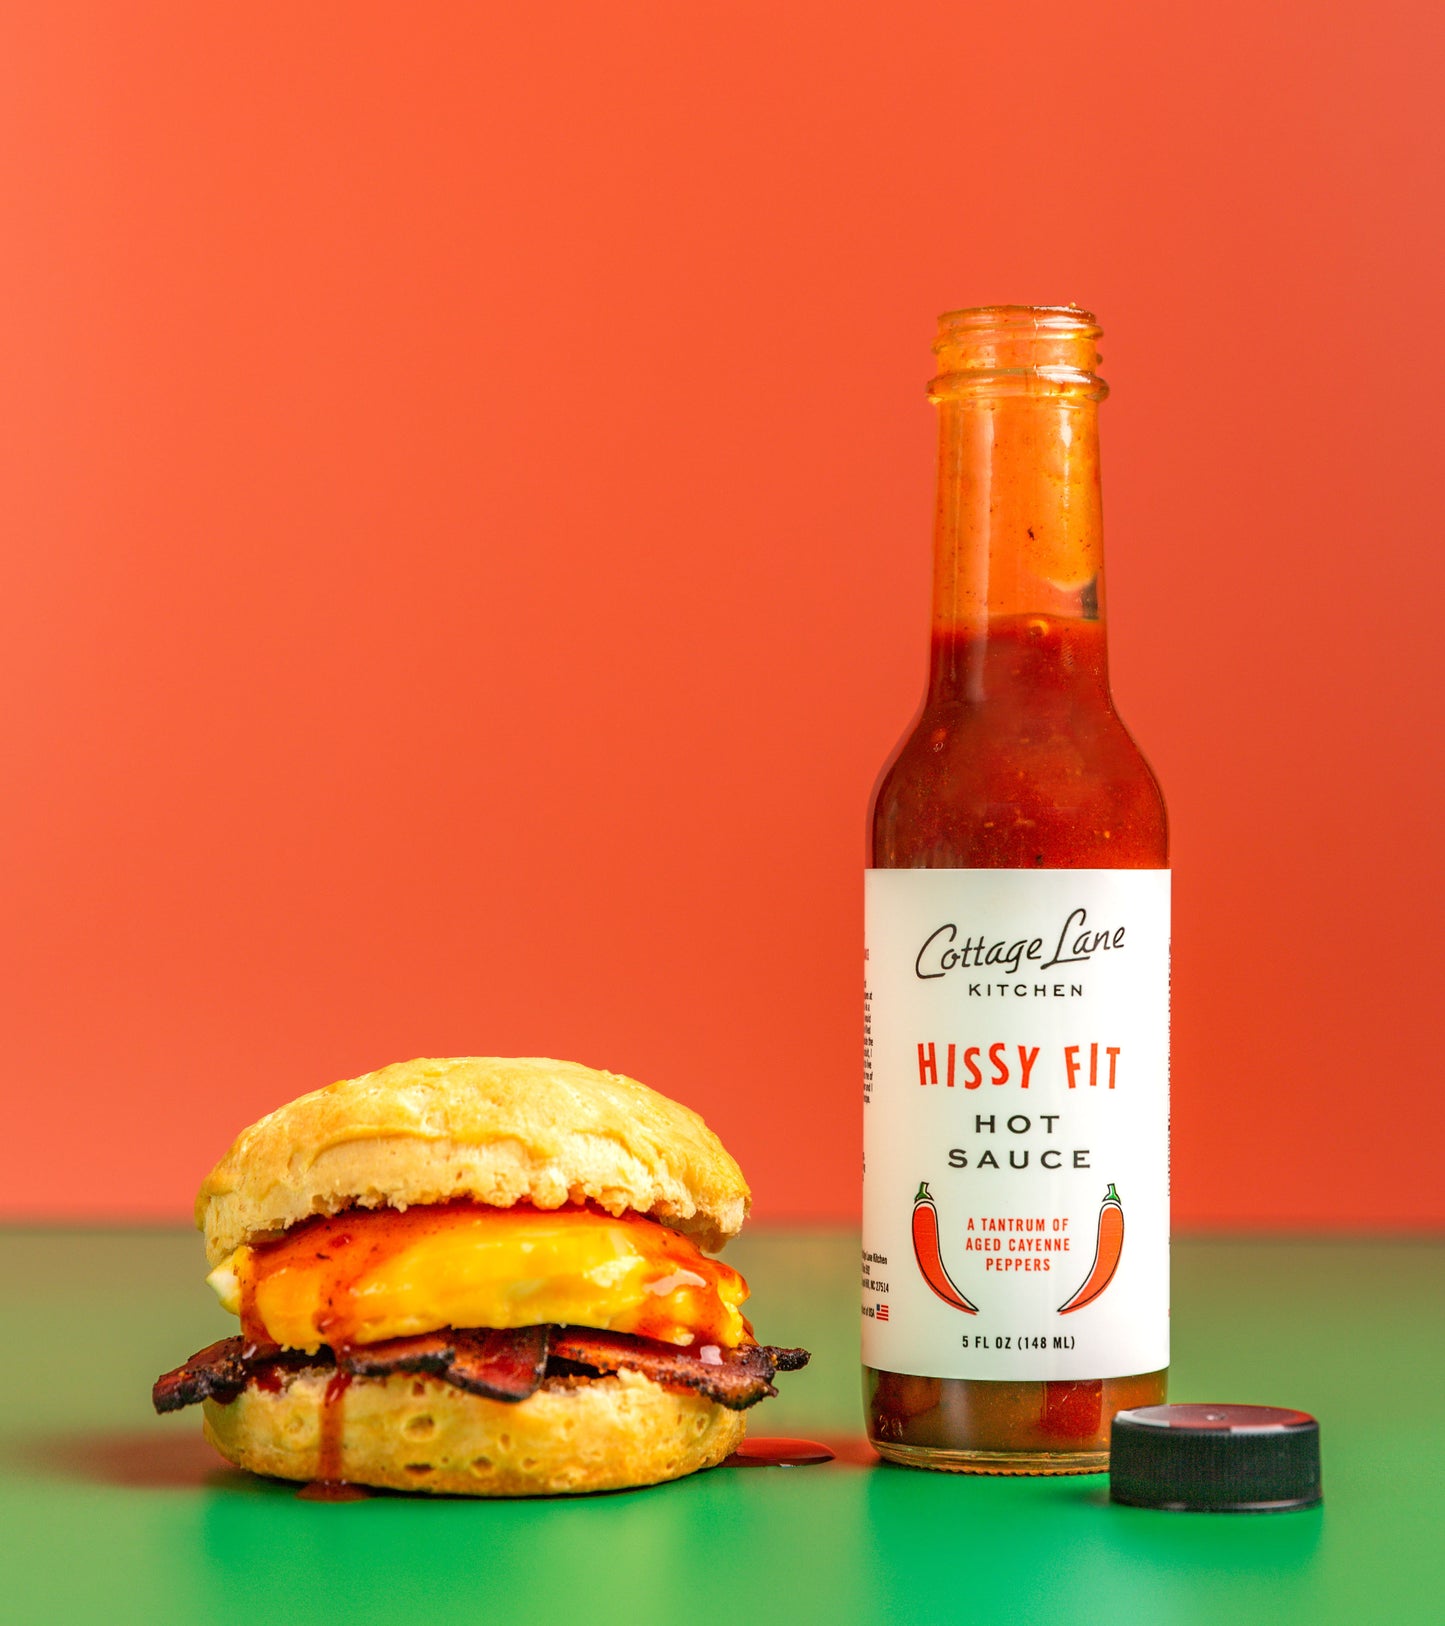 Photo of Hissy Fit Hot Sauce on Egg and Bacon Biscuit with bright red background